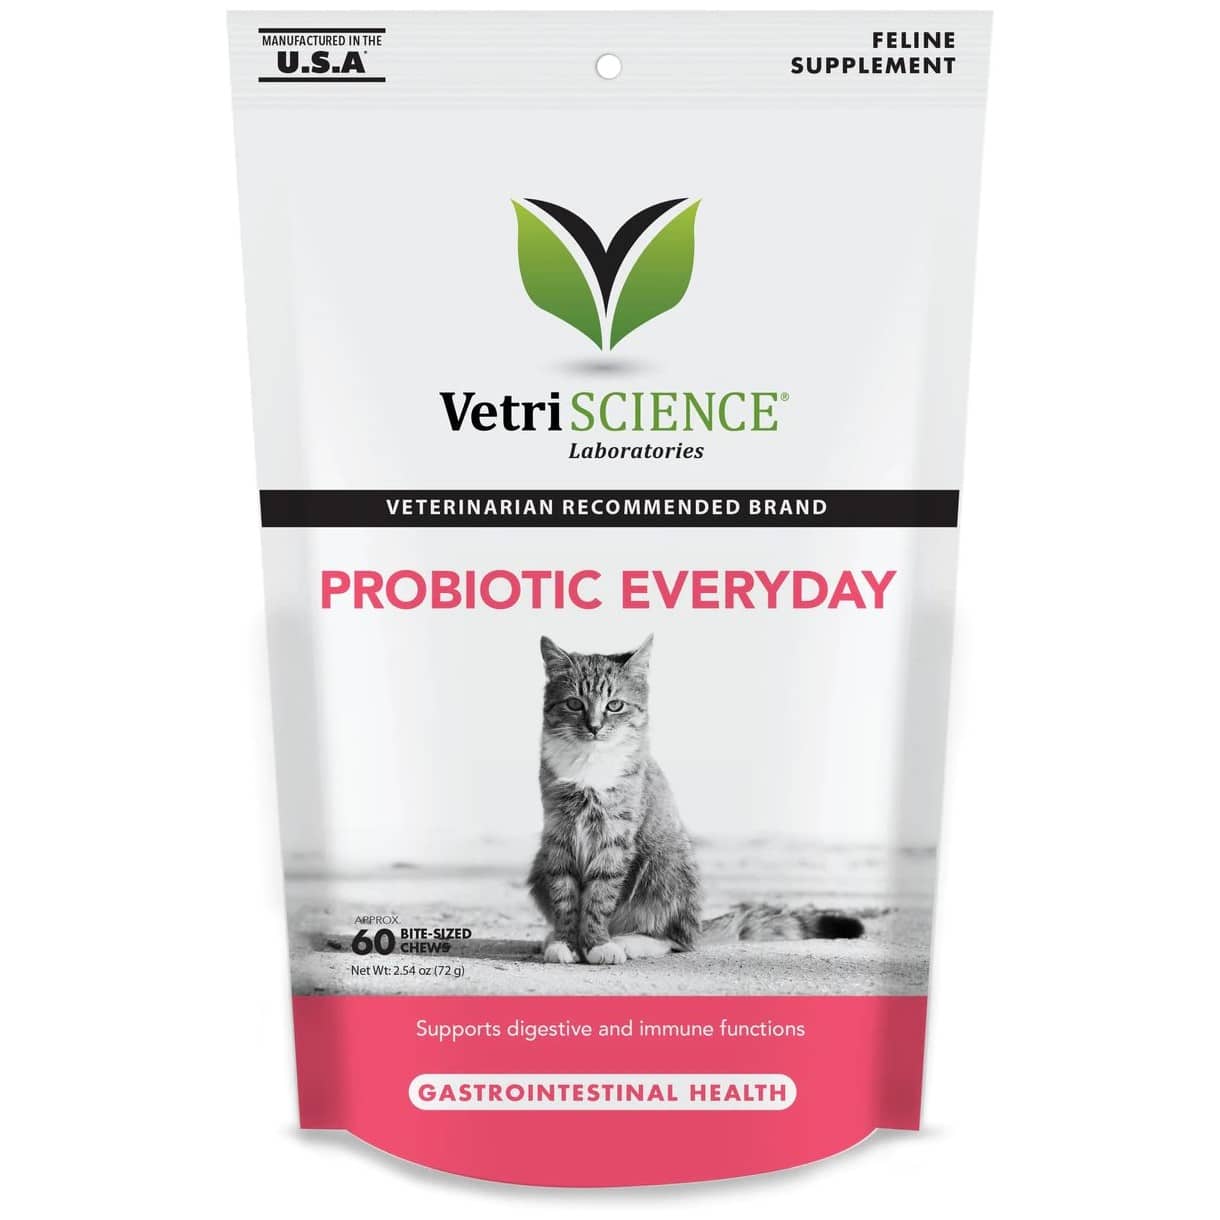 VetriScience Probiotic Everyday Duck Flavored Soft Chews Digestive Supplement for Cats